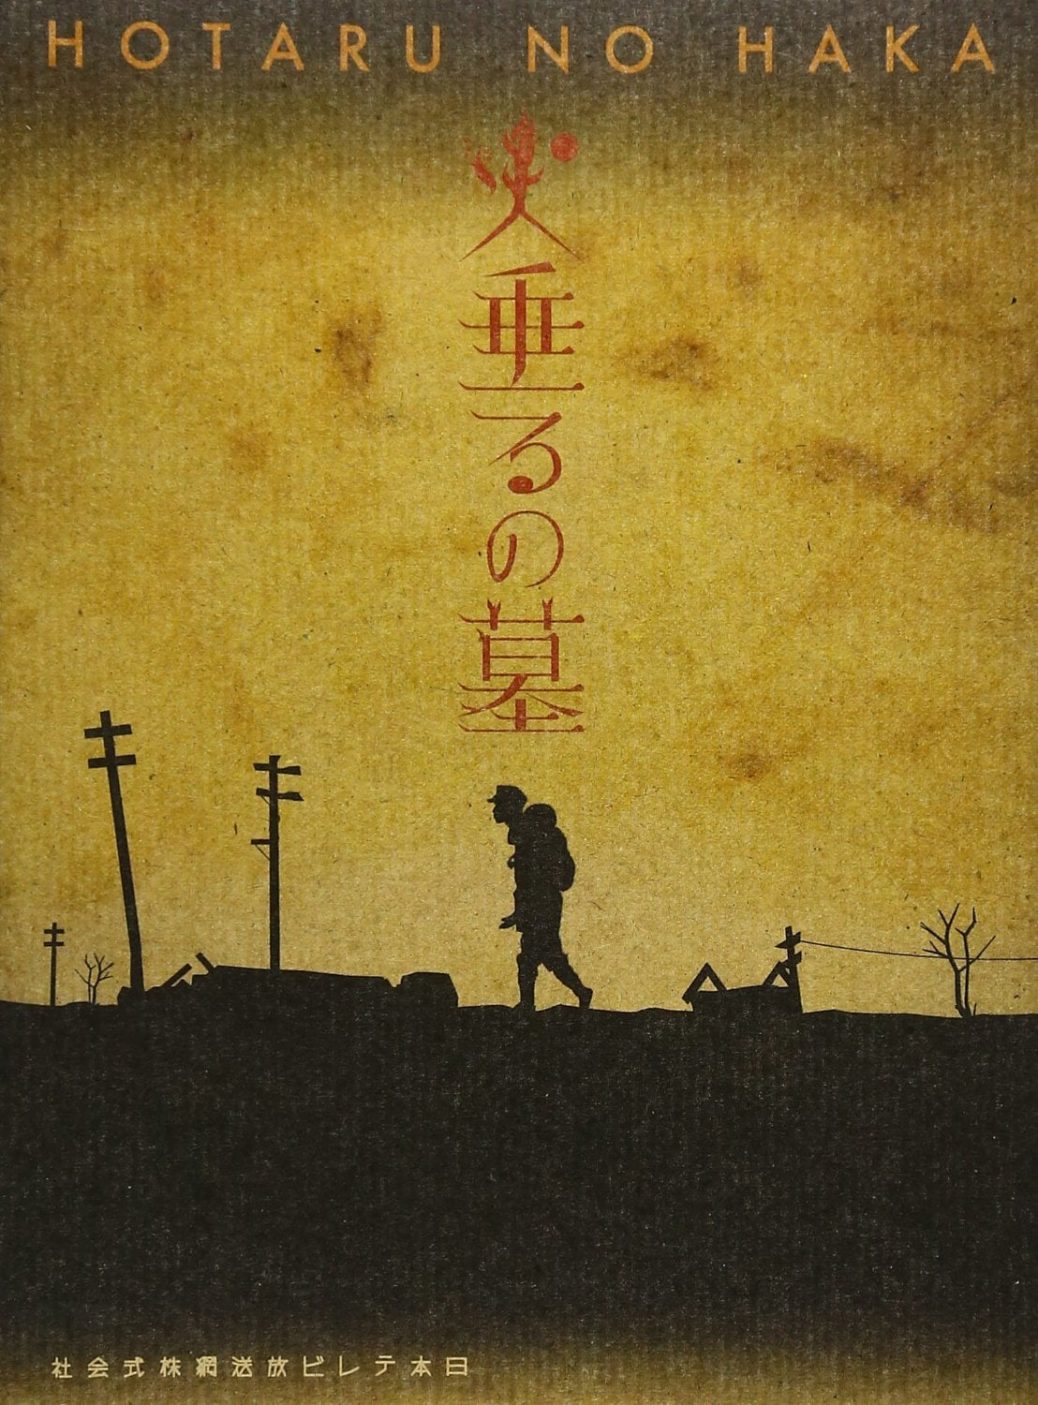 Poster for the movie "Grave of the Fireflies"